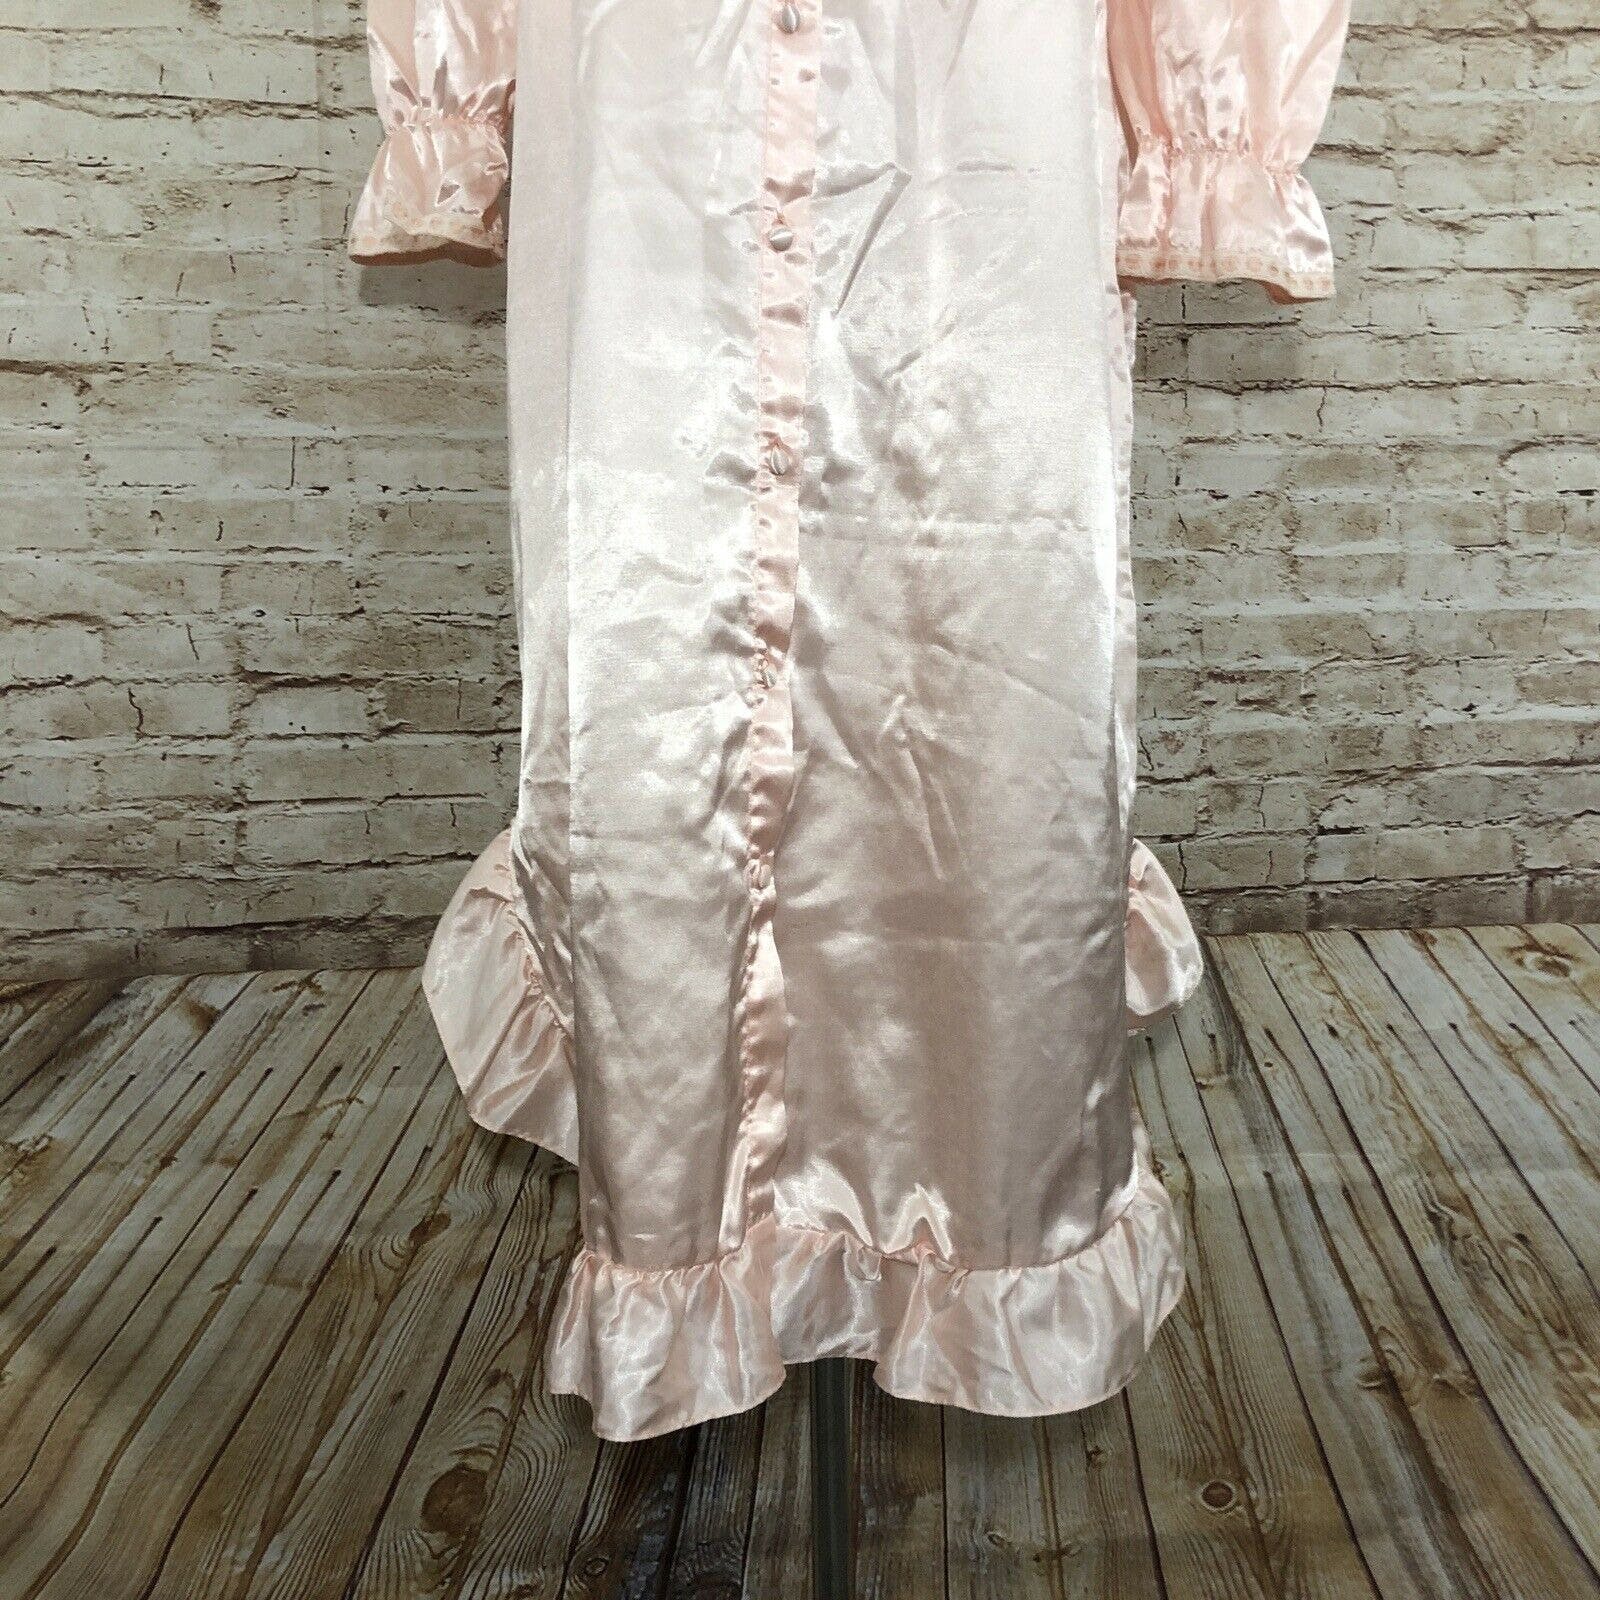 Vintage Silky Nightgown Ruffle Lace Collar by L'intima | Shop THRILLING